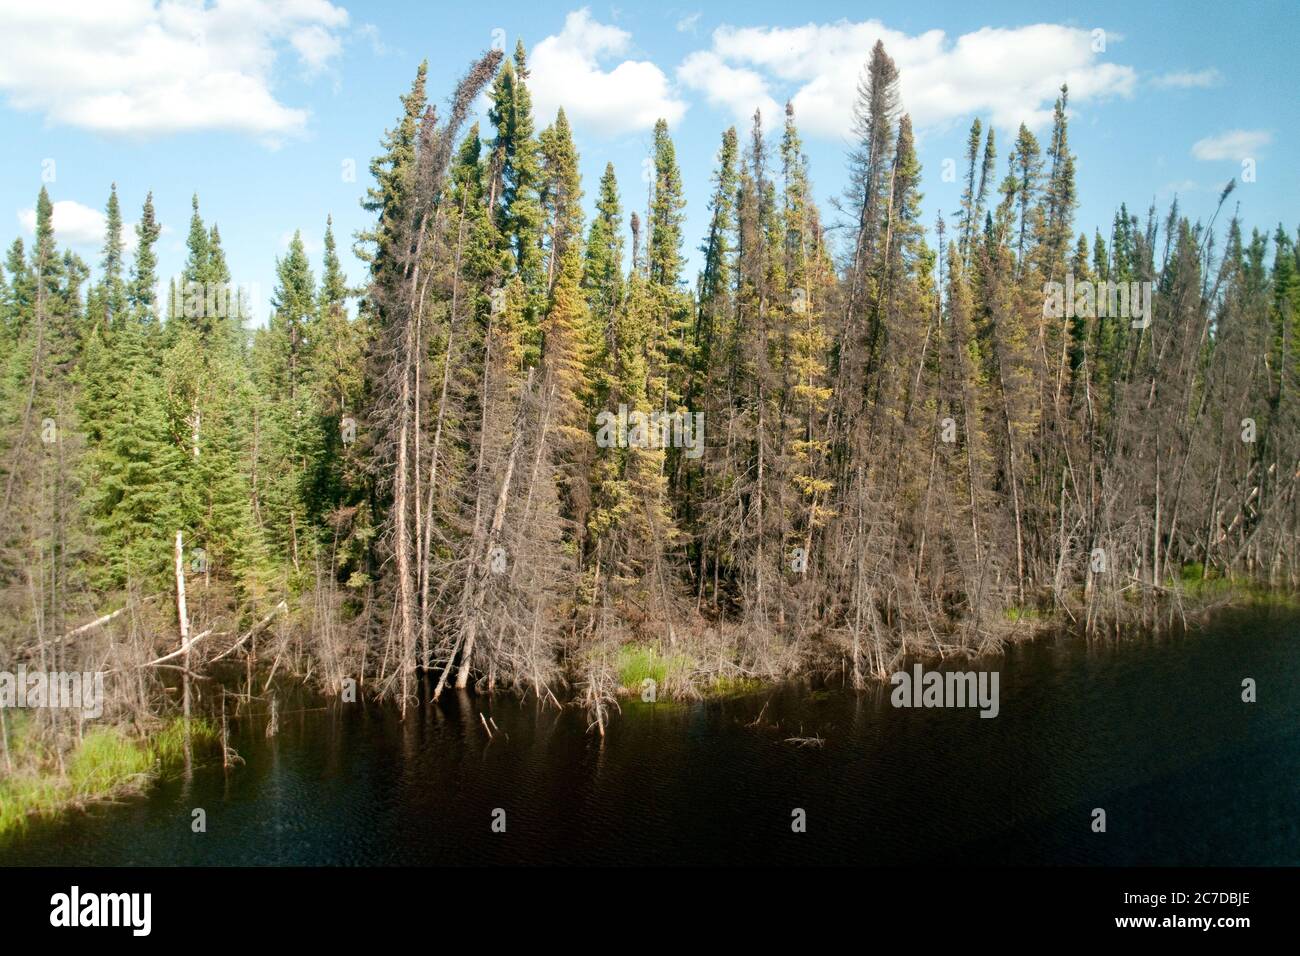 Wetlands, bog and coniferous forest in the remote boreal forest wilderness near The Pas, northern Manitoba, Canada. Stock Photo